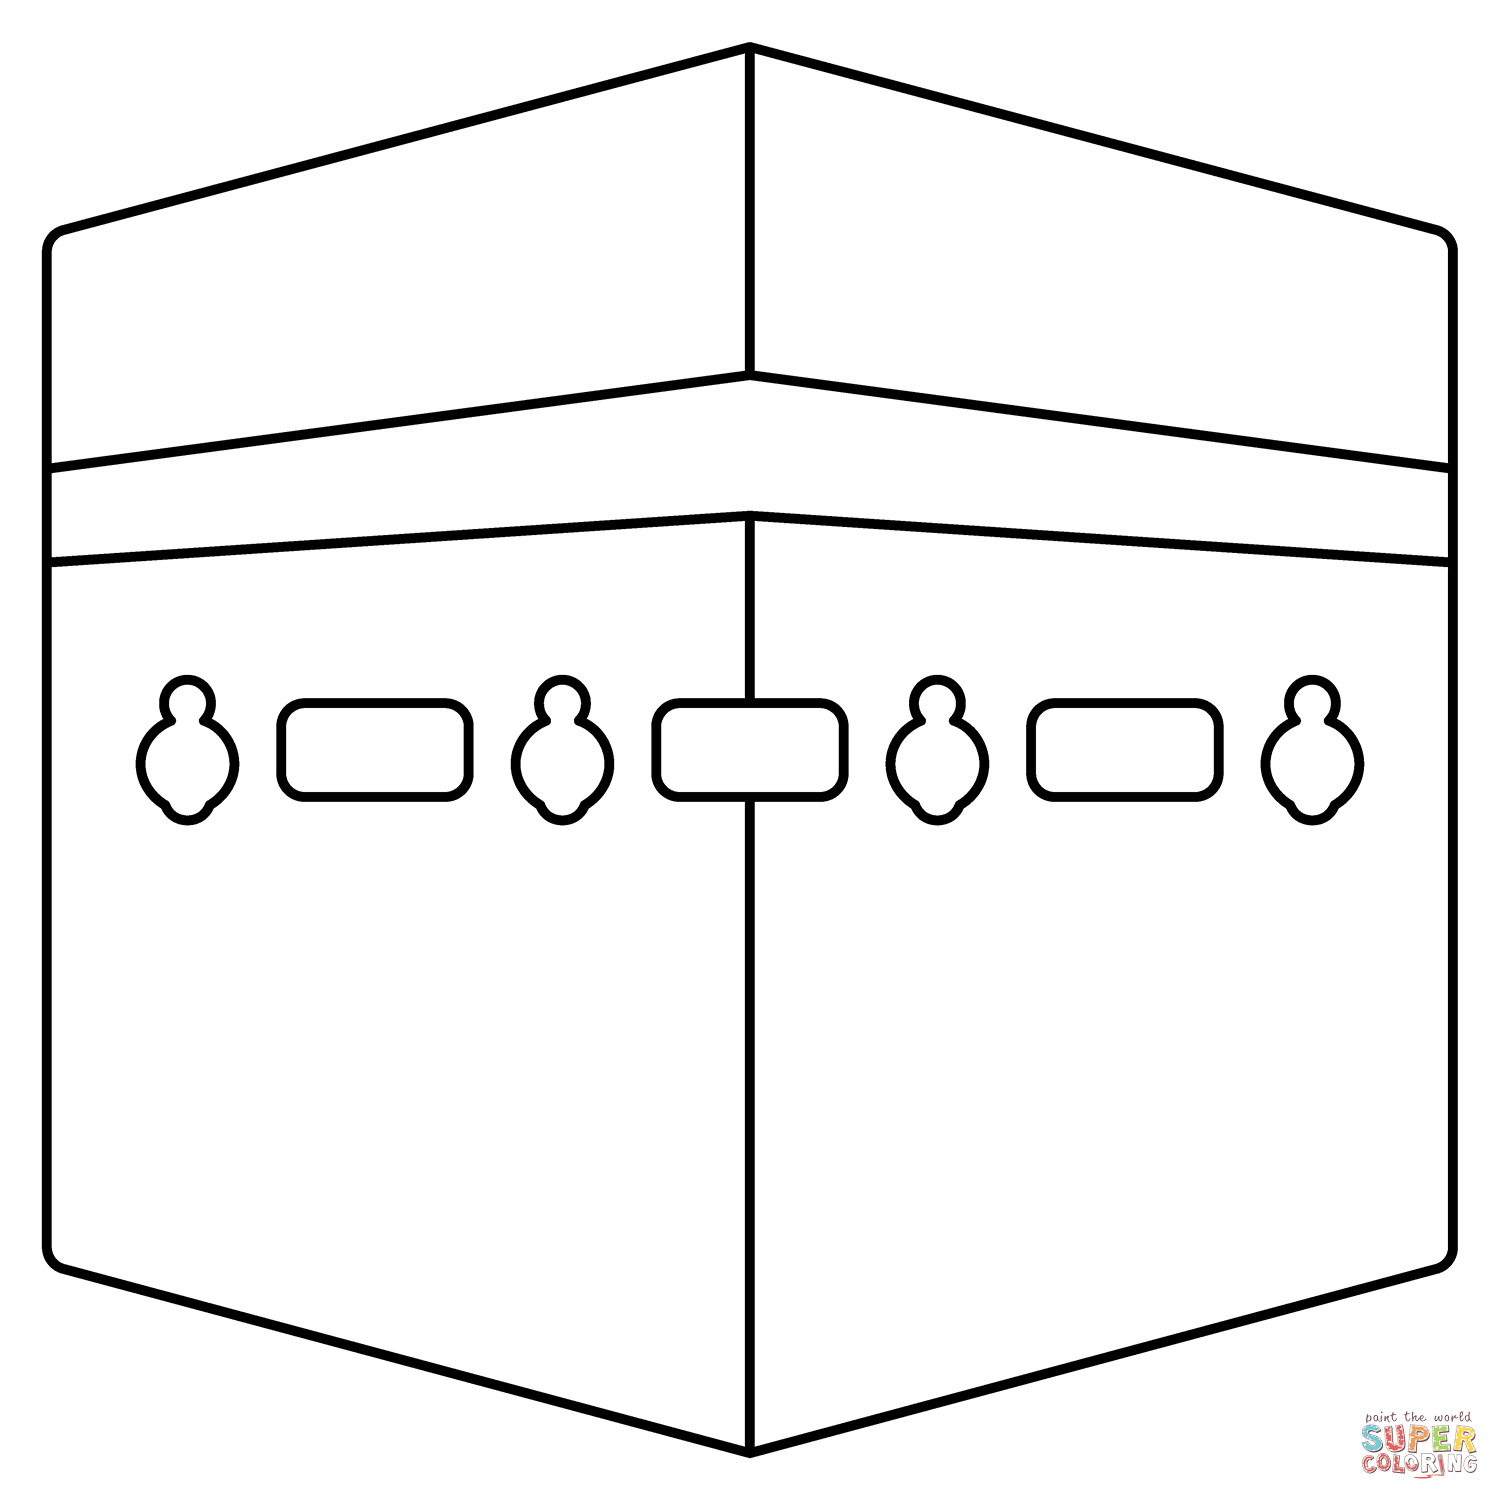 Kaaba emoji coloring page for kids